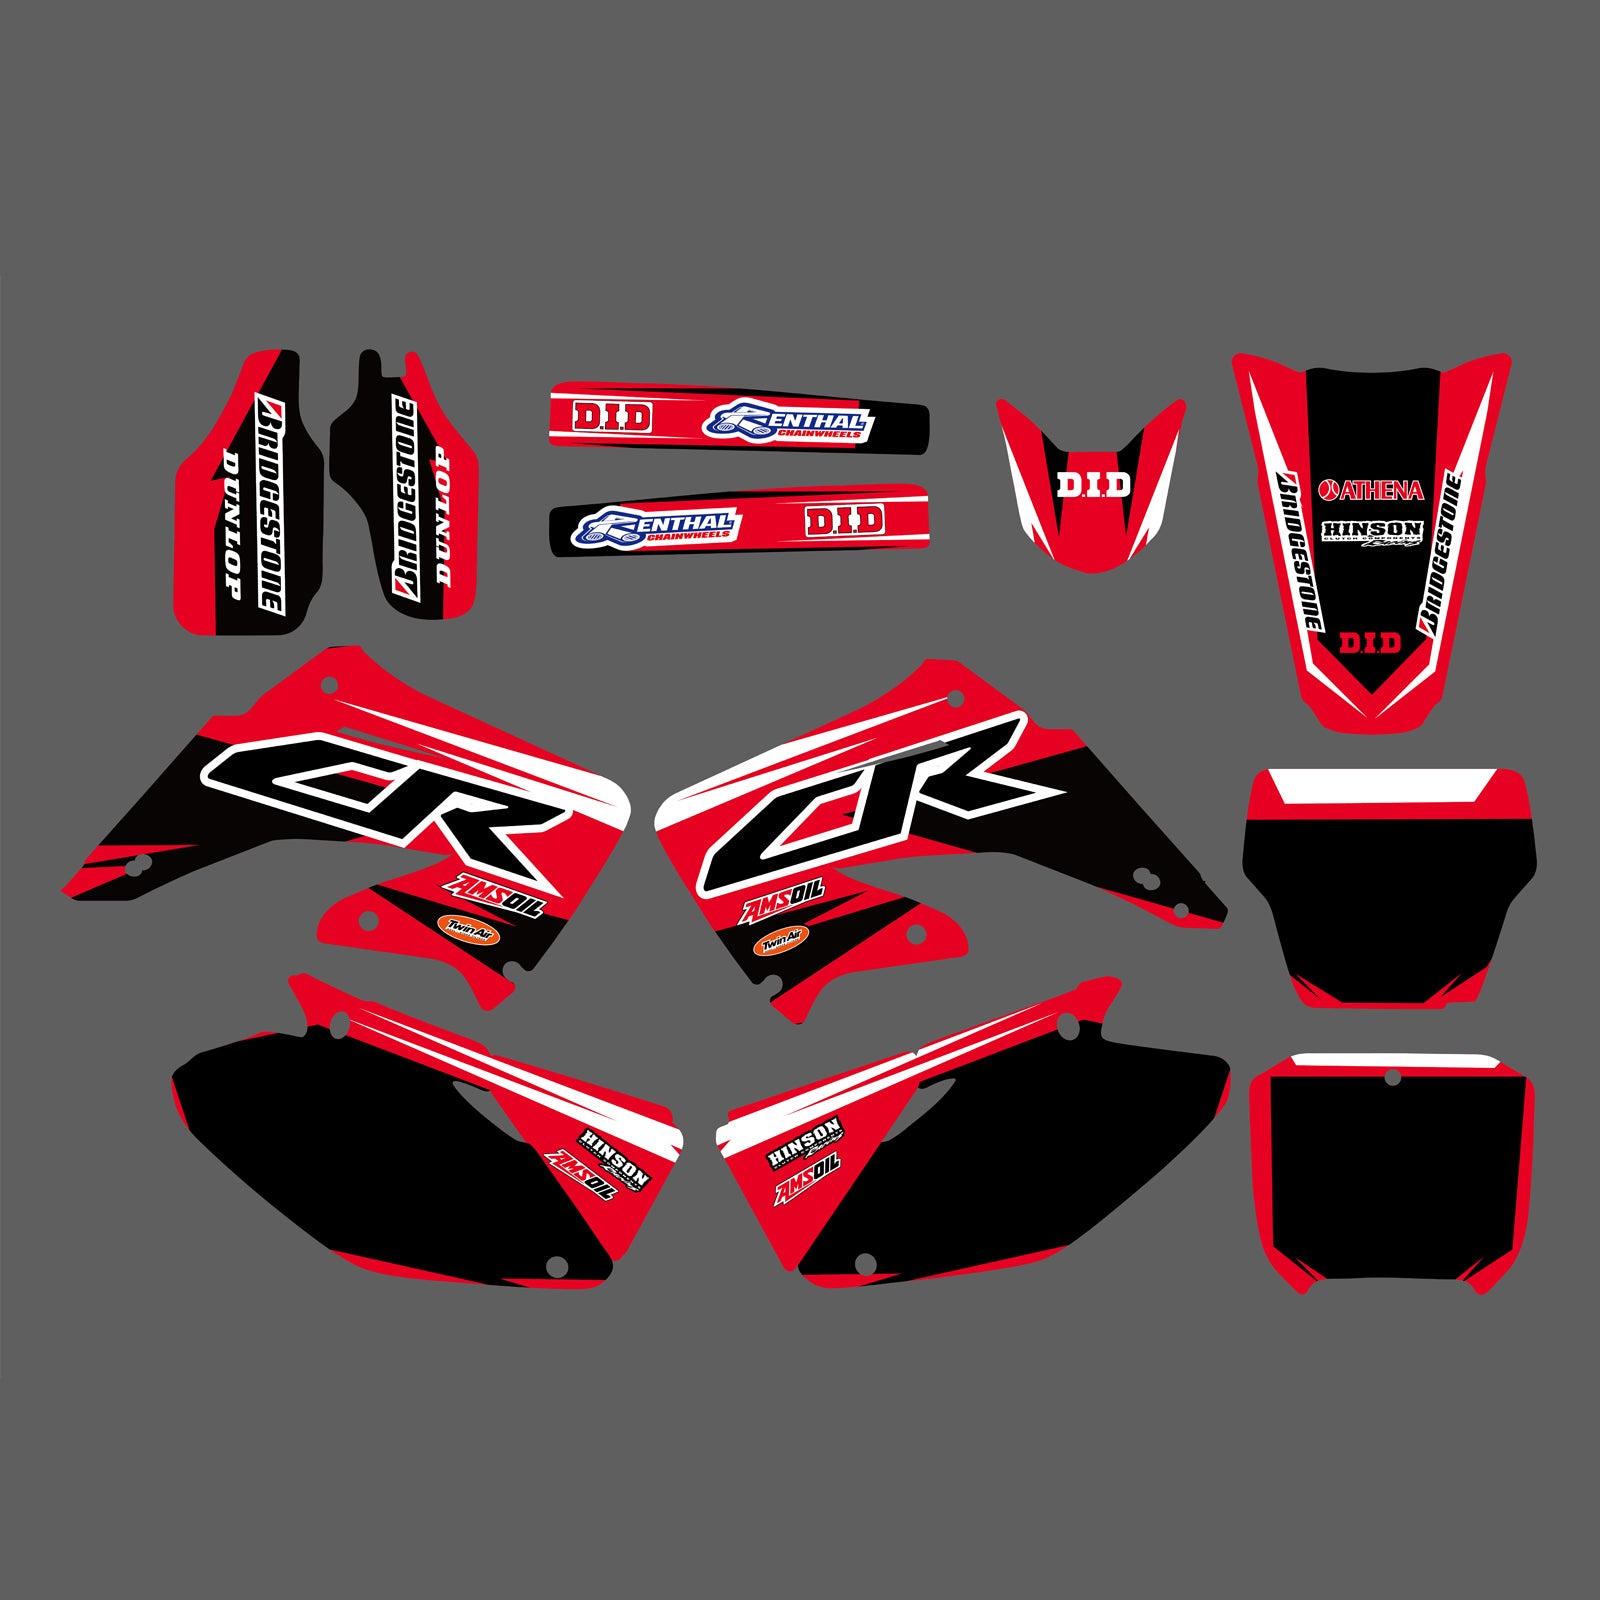 Team Graphics Background Sticker Decal Kits for Honda CR125/CR250 2002-2012